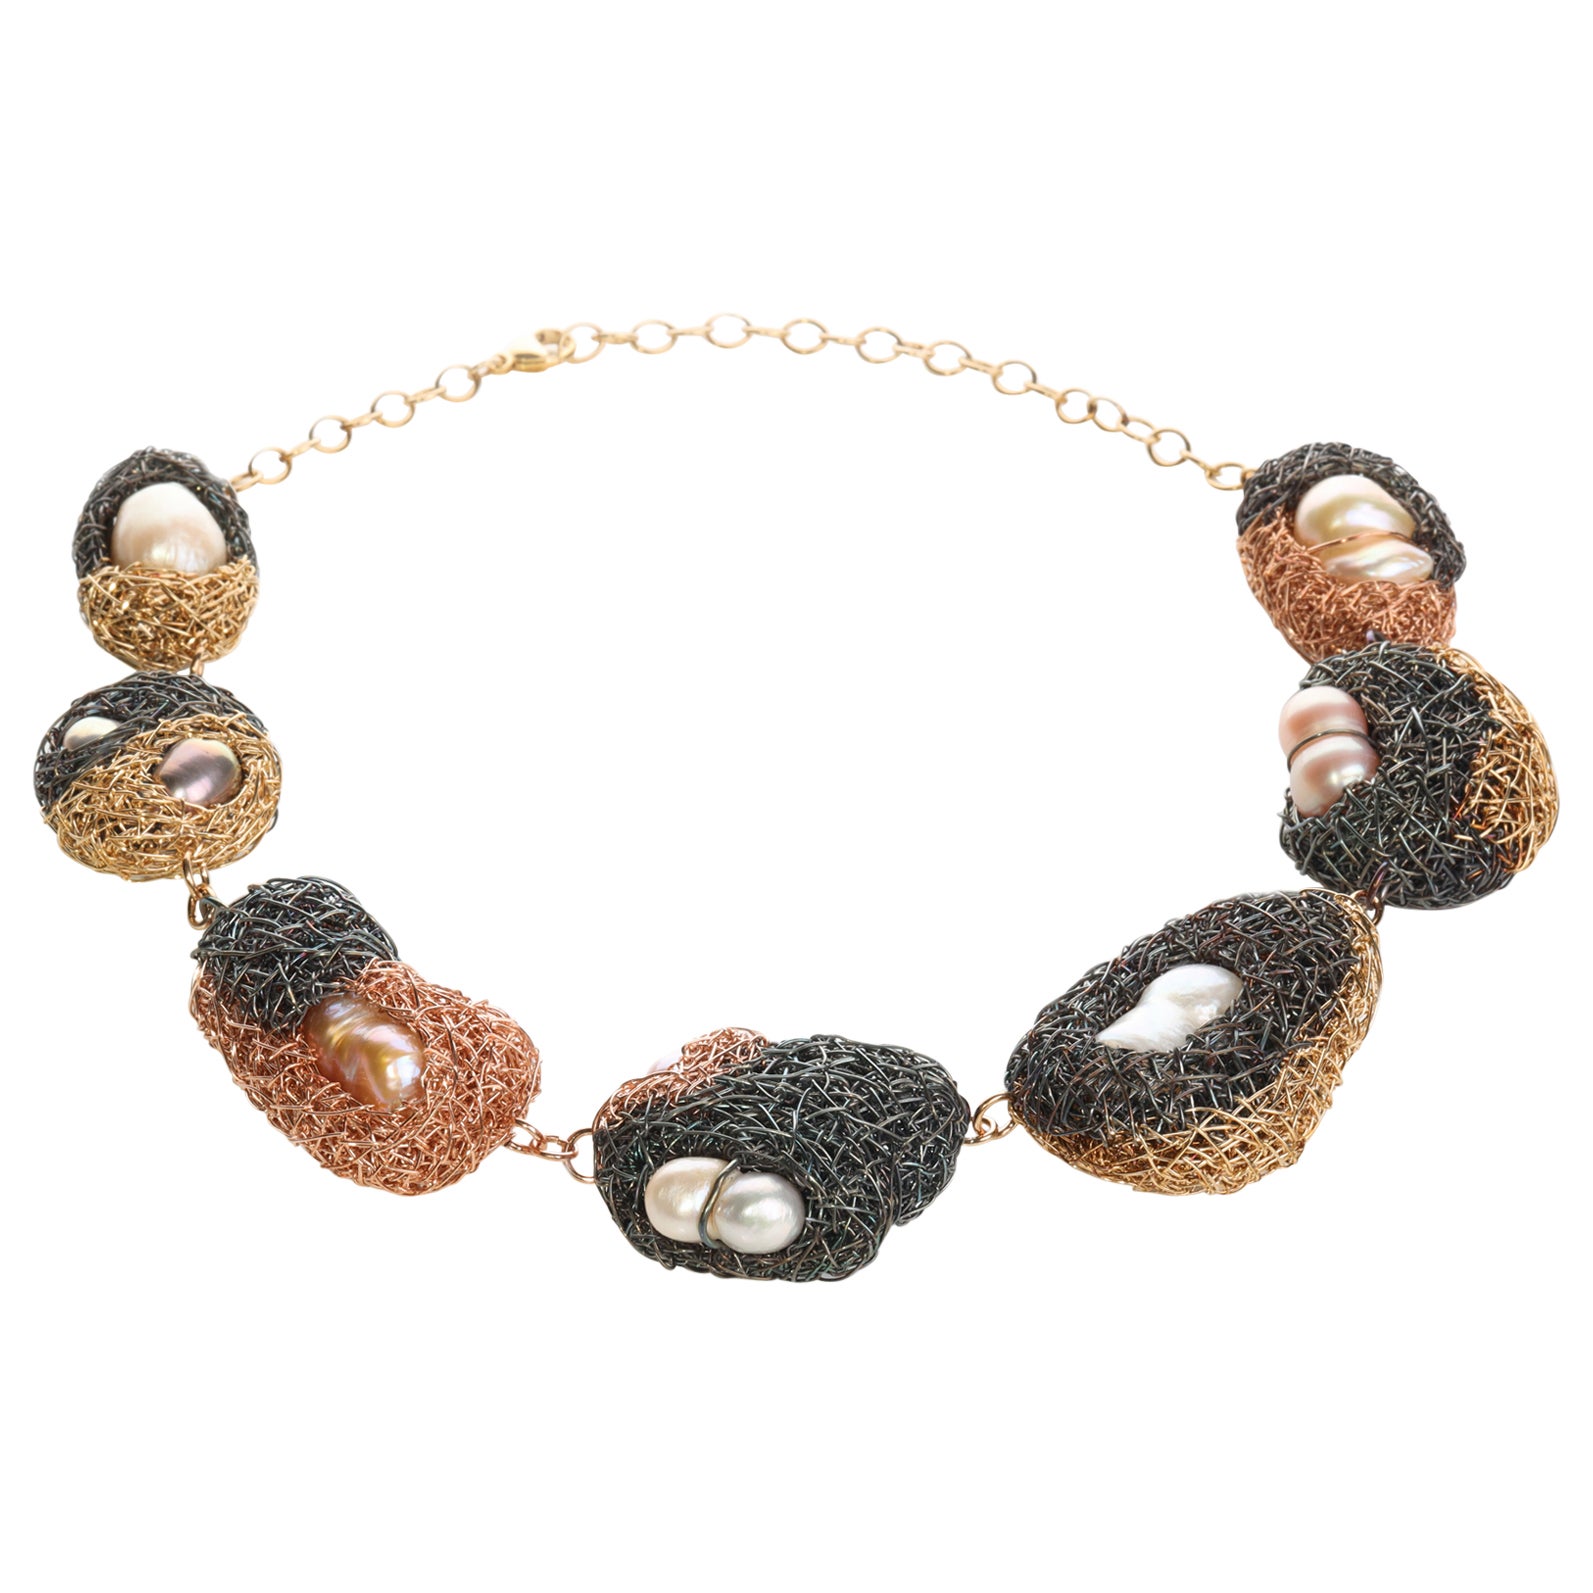 Pearl One-off Statement Necklace combined in different materials by the Artist